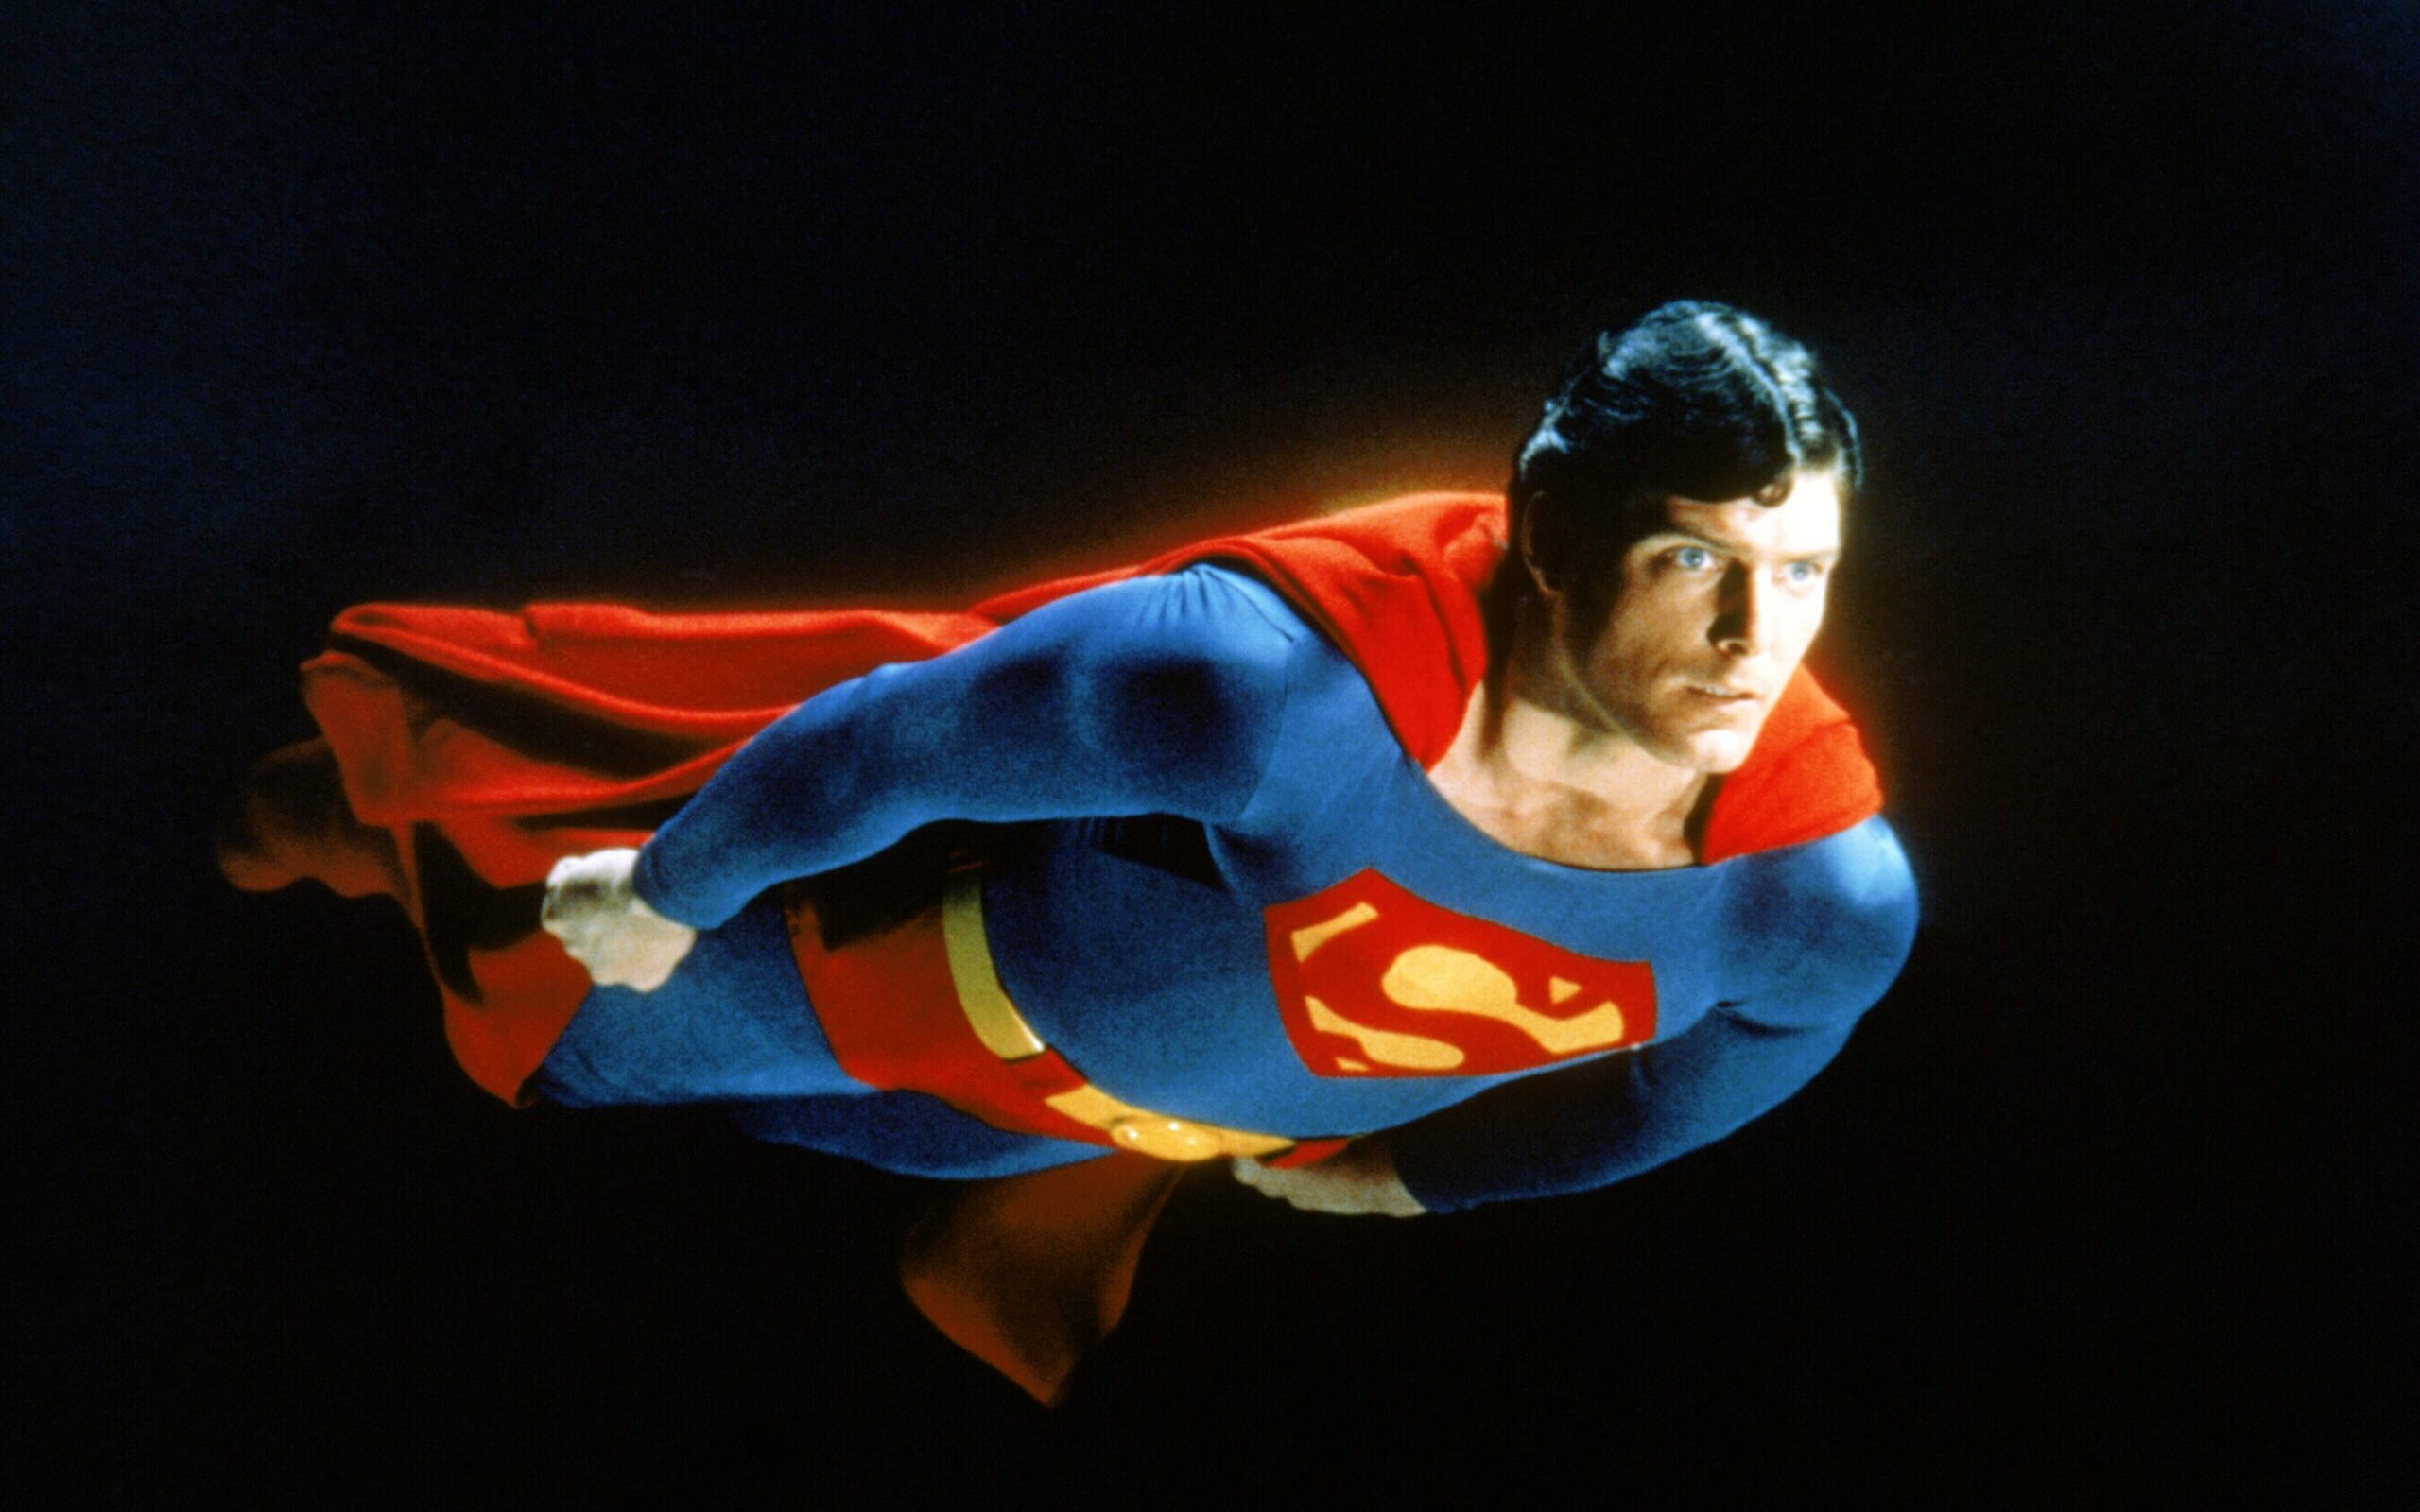 SUPERMAN, Christopher Reeve, 1978. ©Warner Brothers/courtesy Everett Collection